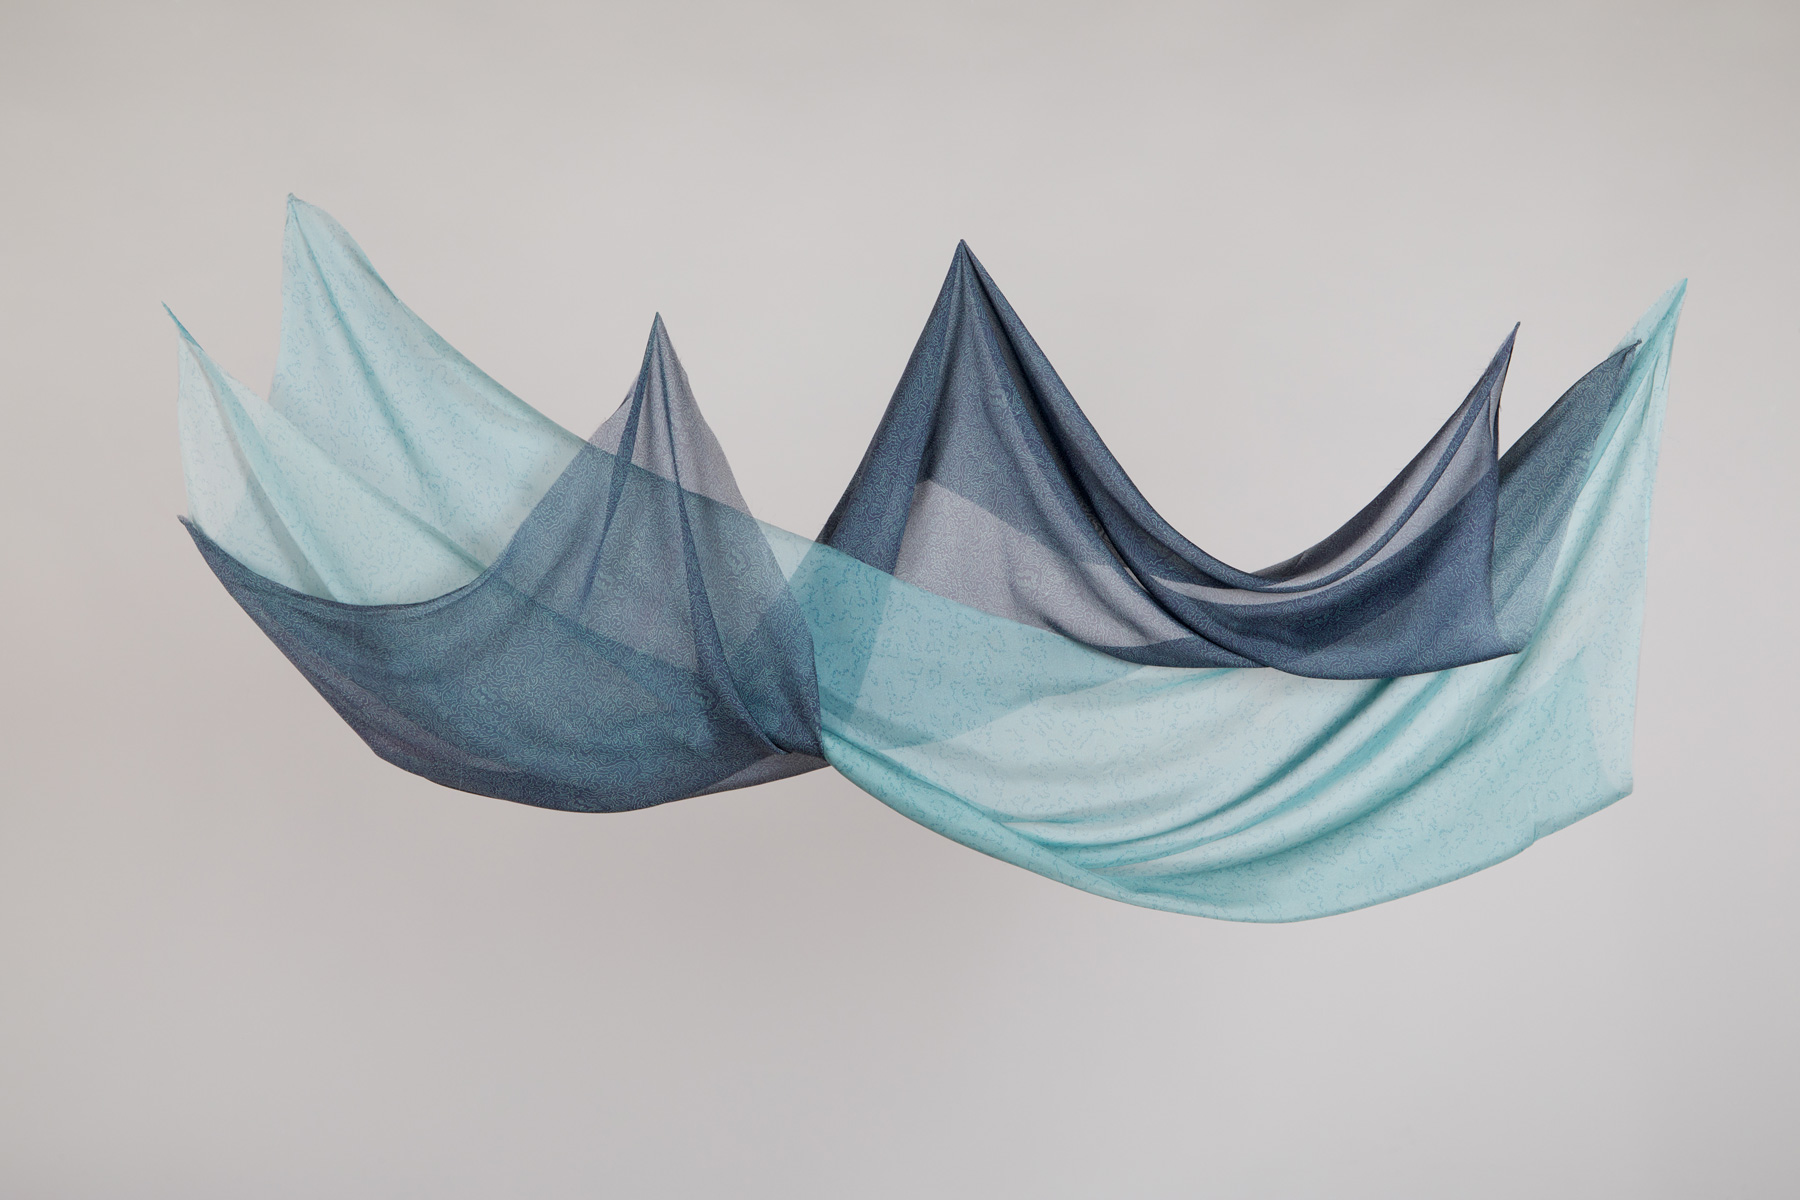 Photograph showing fluid light blue and dark blue silk suspended prints by Annabel Rowe.